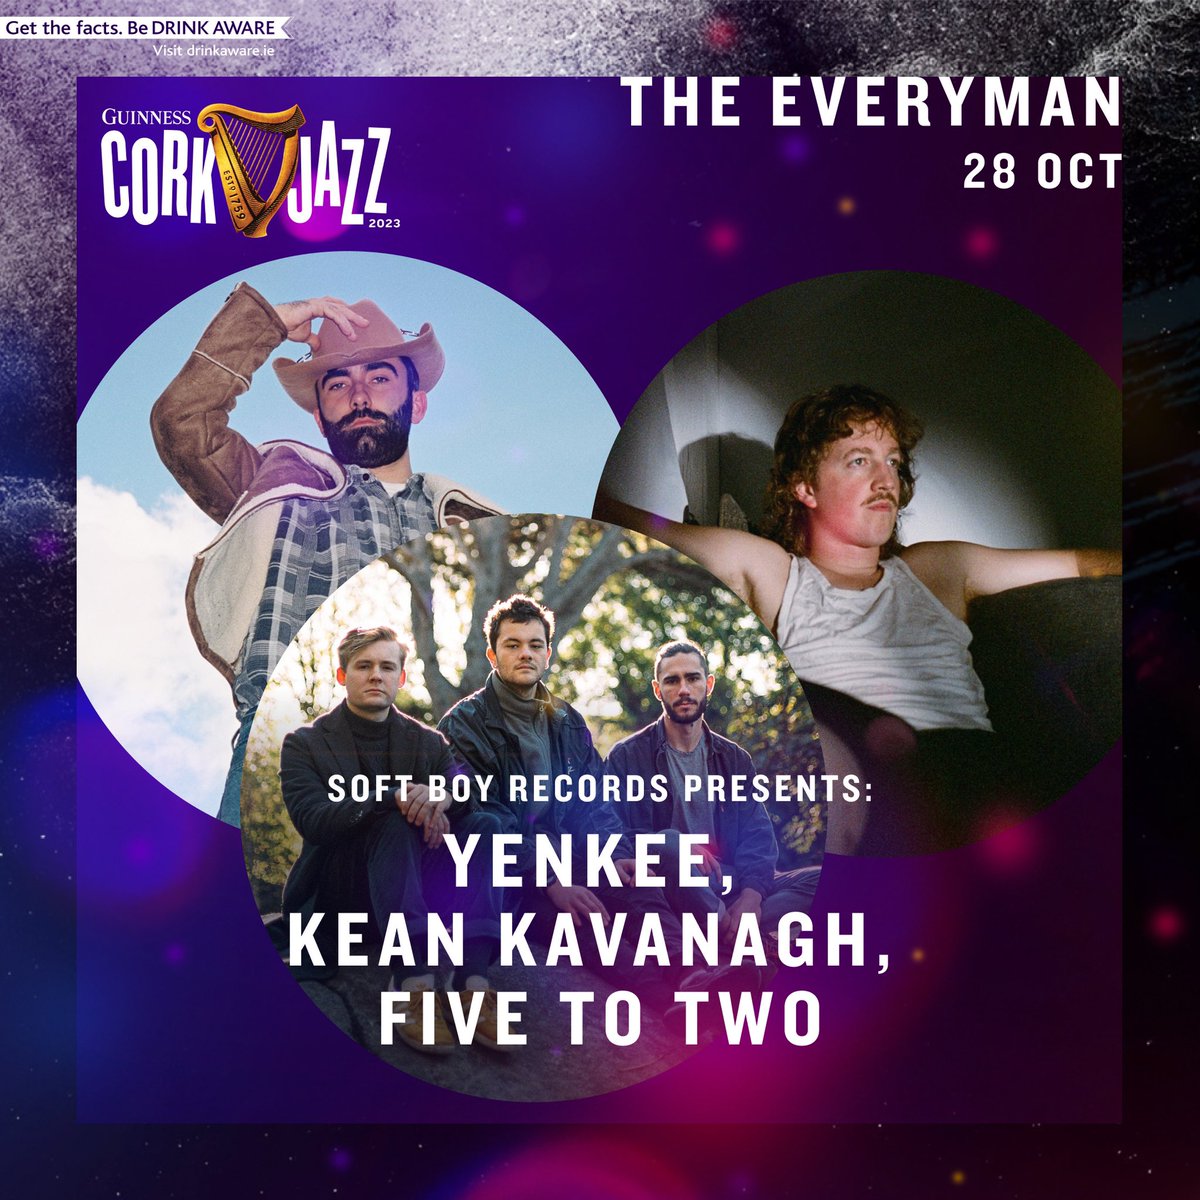 Don’t forget to grab a ticket for our event at @EverymanCork theatre on Oct 28th for @corkjazzfest! Yenkee, @keankavanagh, @fivetotwo + a very special guest TBA 🤫 Tickets: guinnessjazzfestival.ticketsolve.com/ticketbooth/sh…